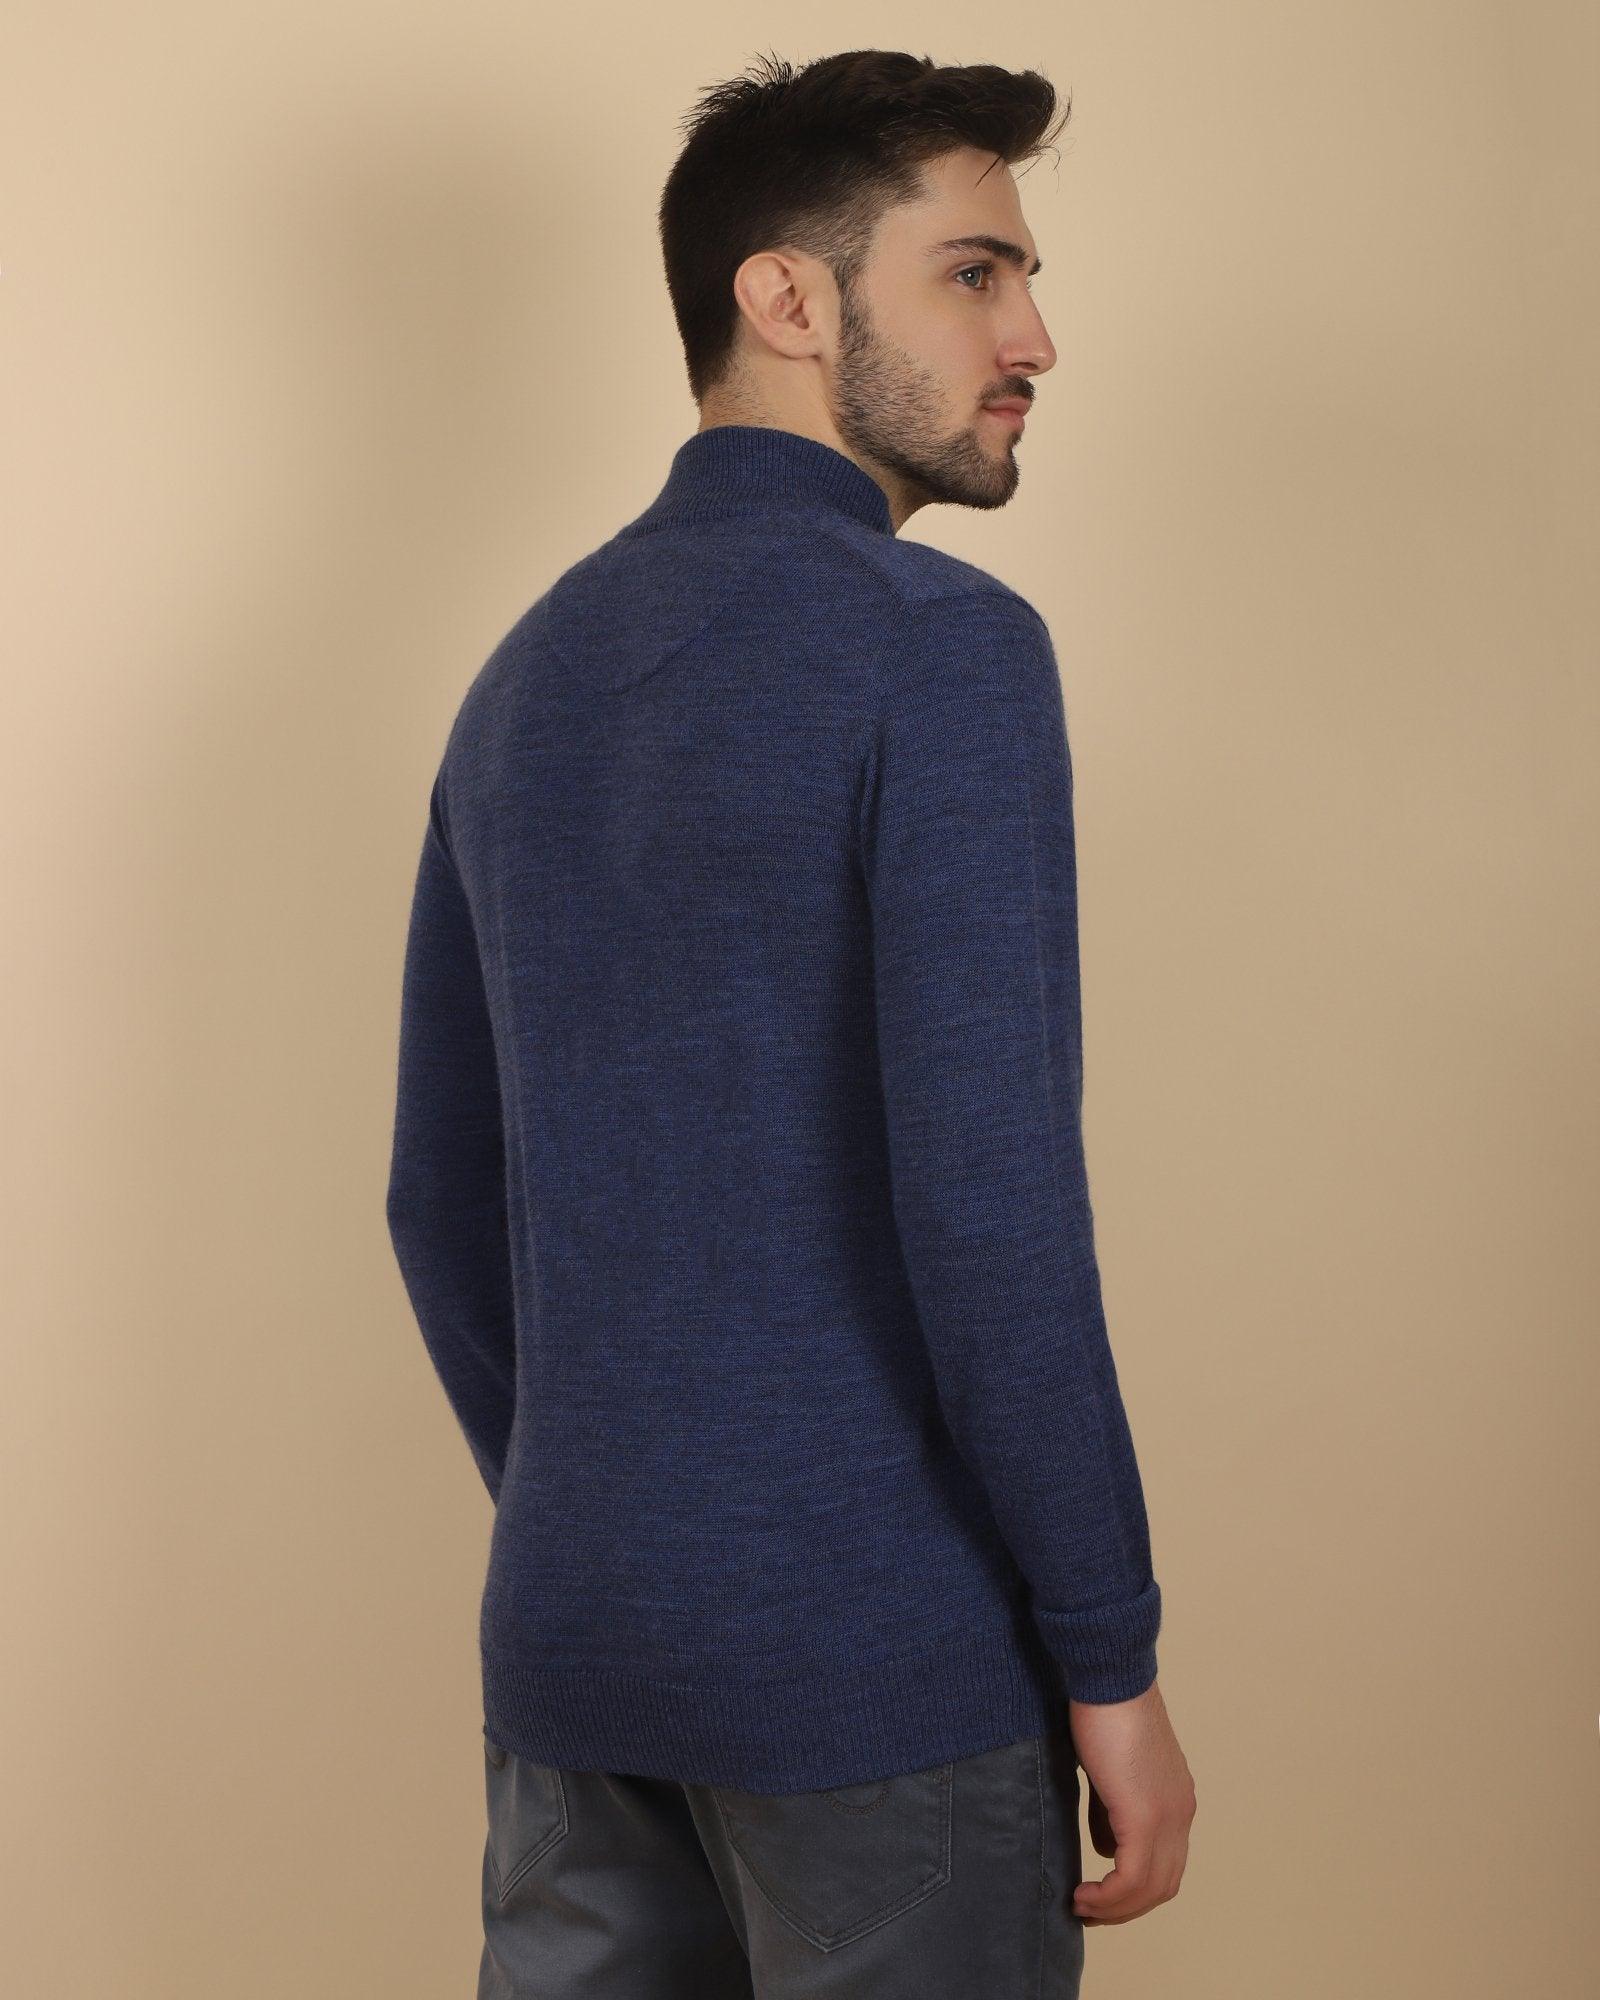 High Neck Electric Blue Solid Sweater - Rigel